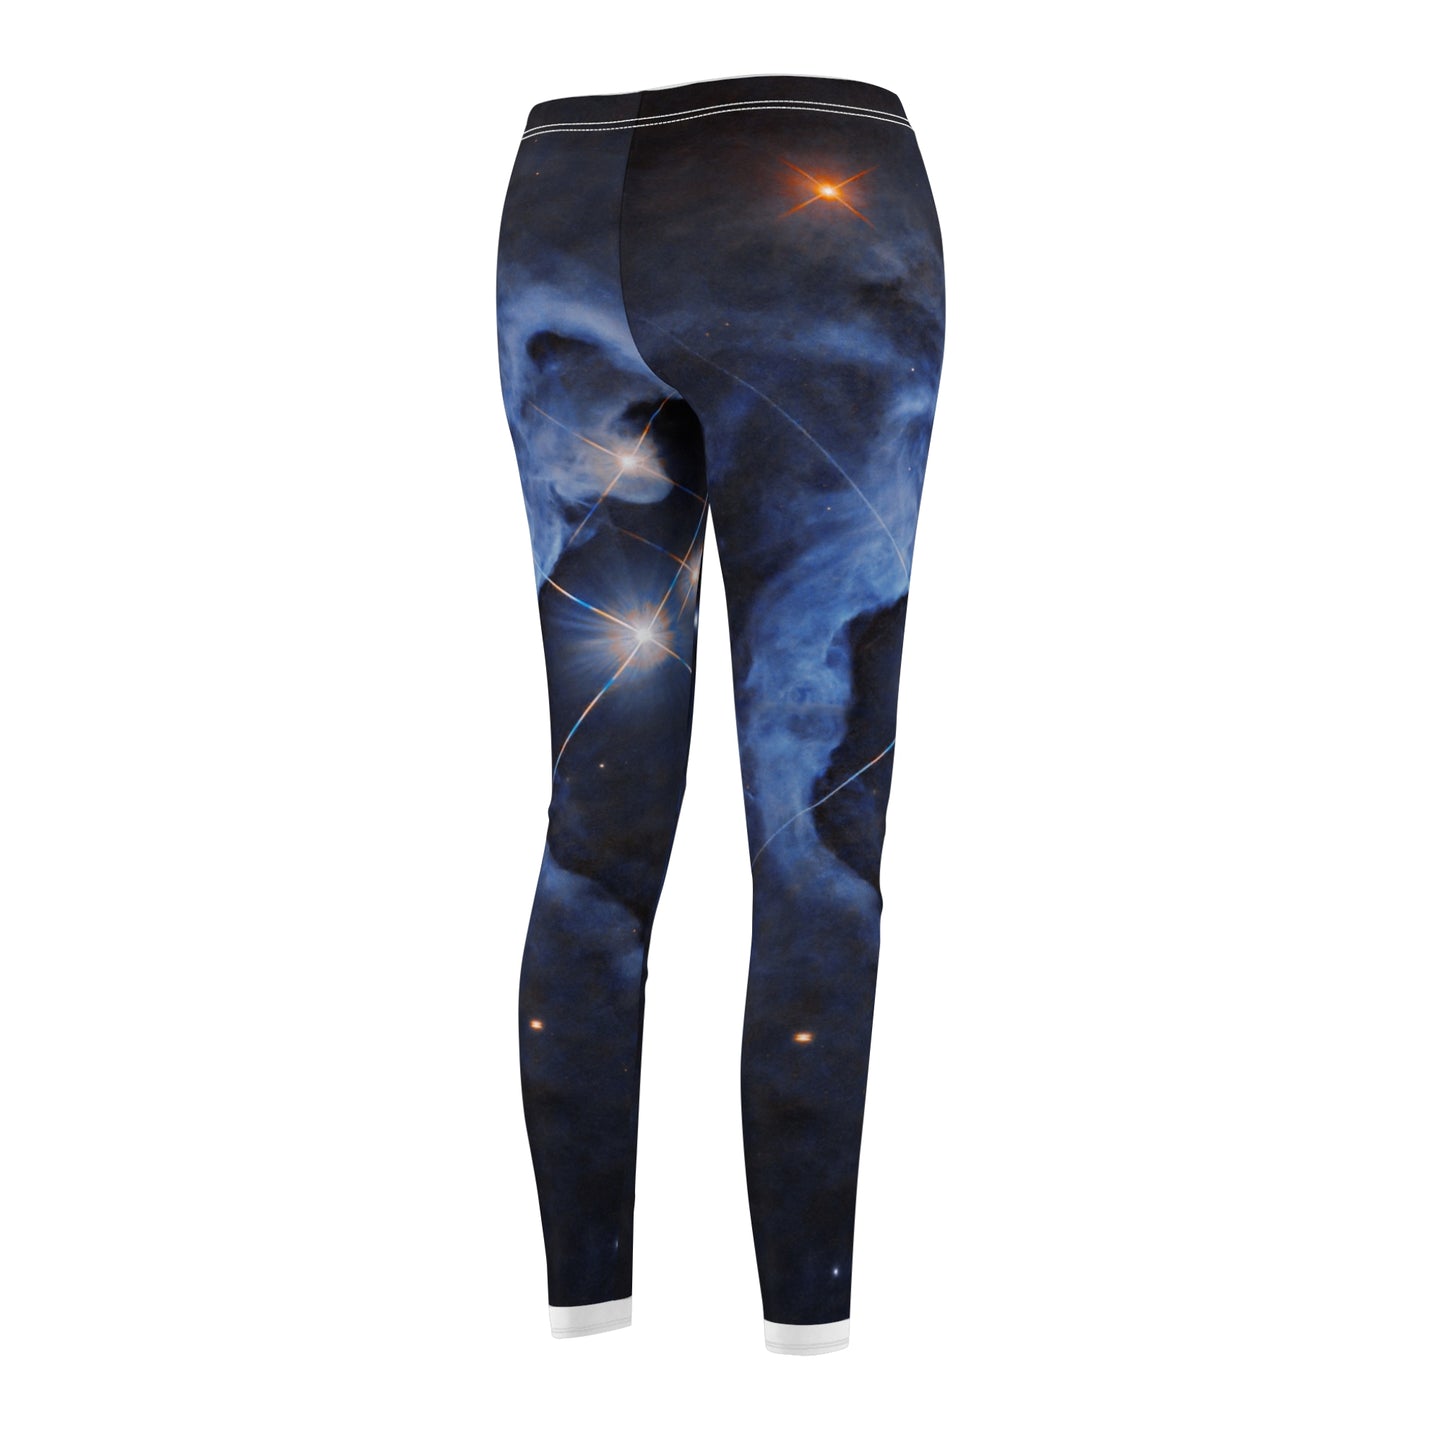 HP Tau, HP Tau G2, and G3 3 star system captured by Hubble - Casual Leggings